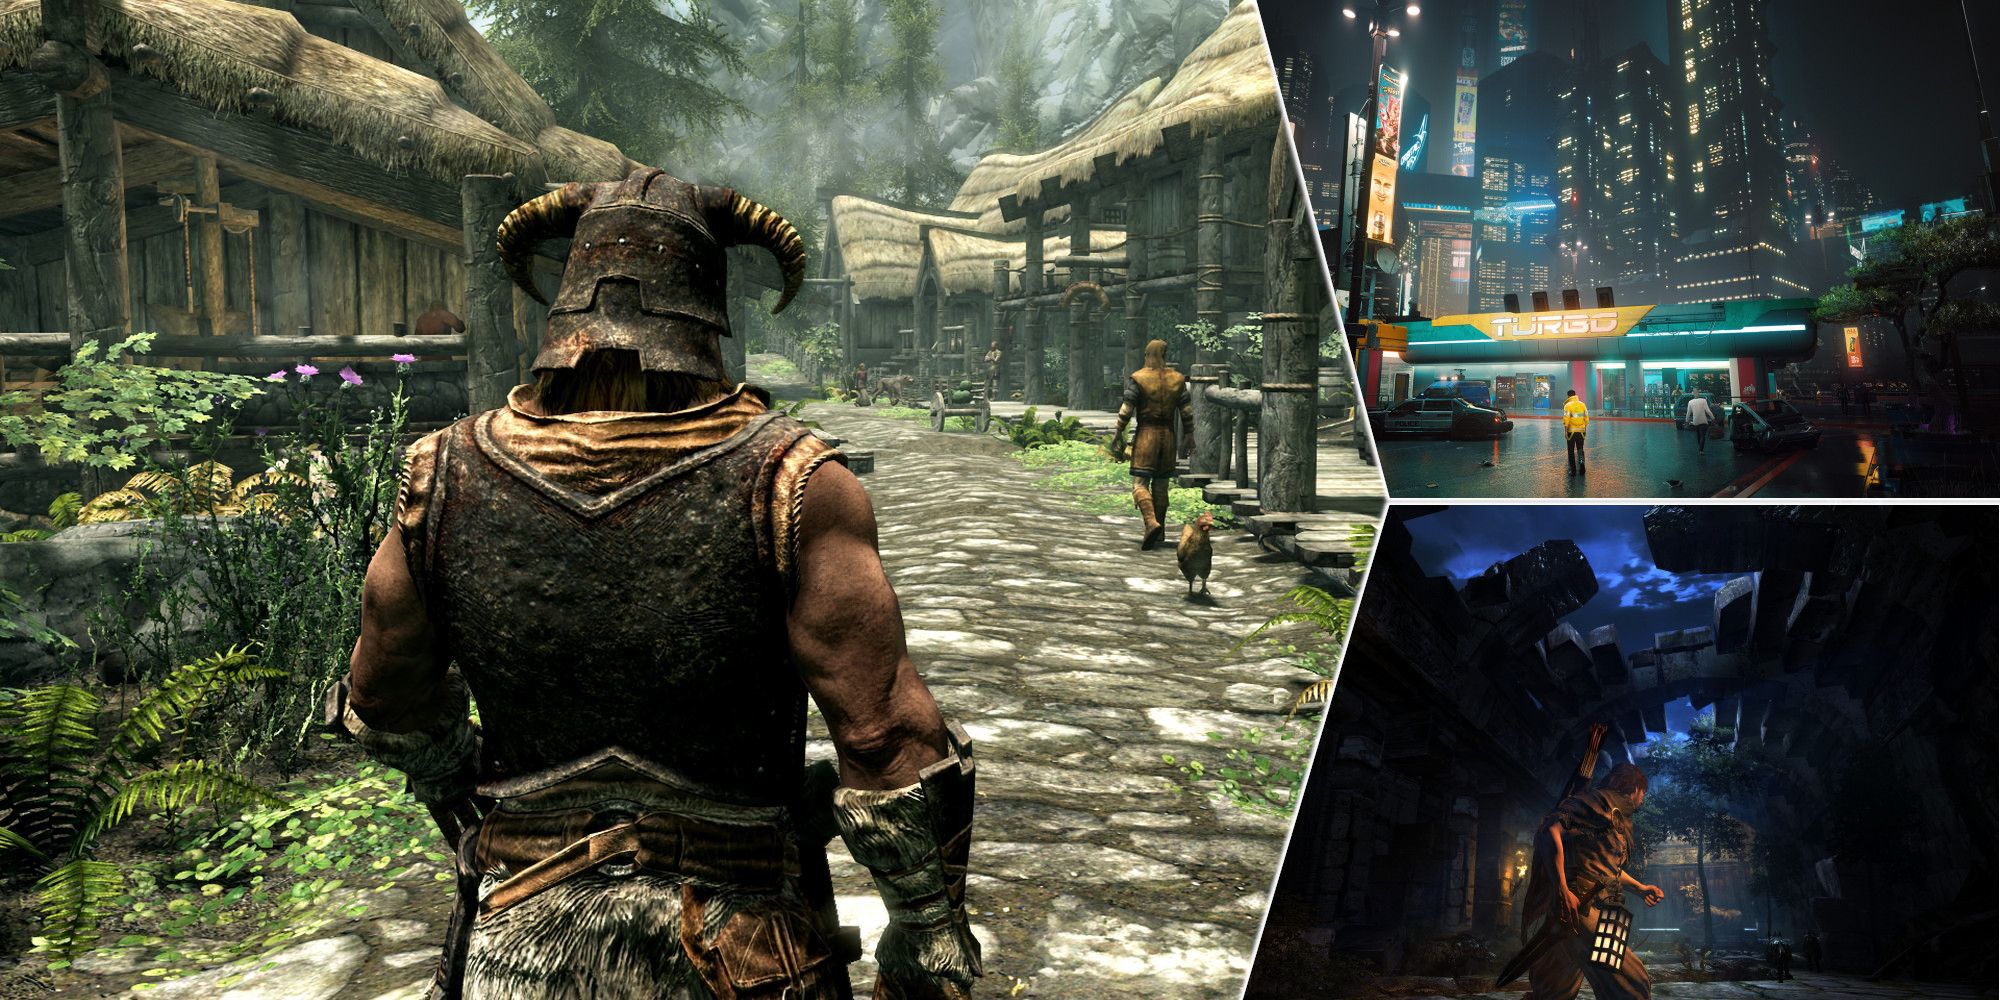 Three games that are good single-player titles for MMORPG fans